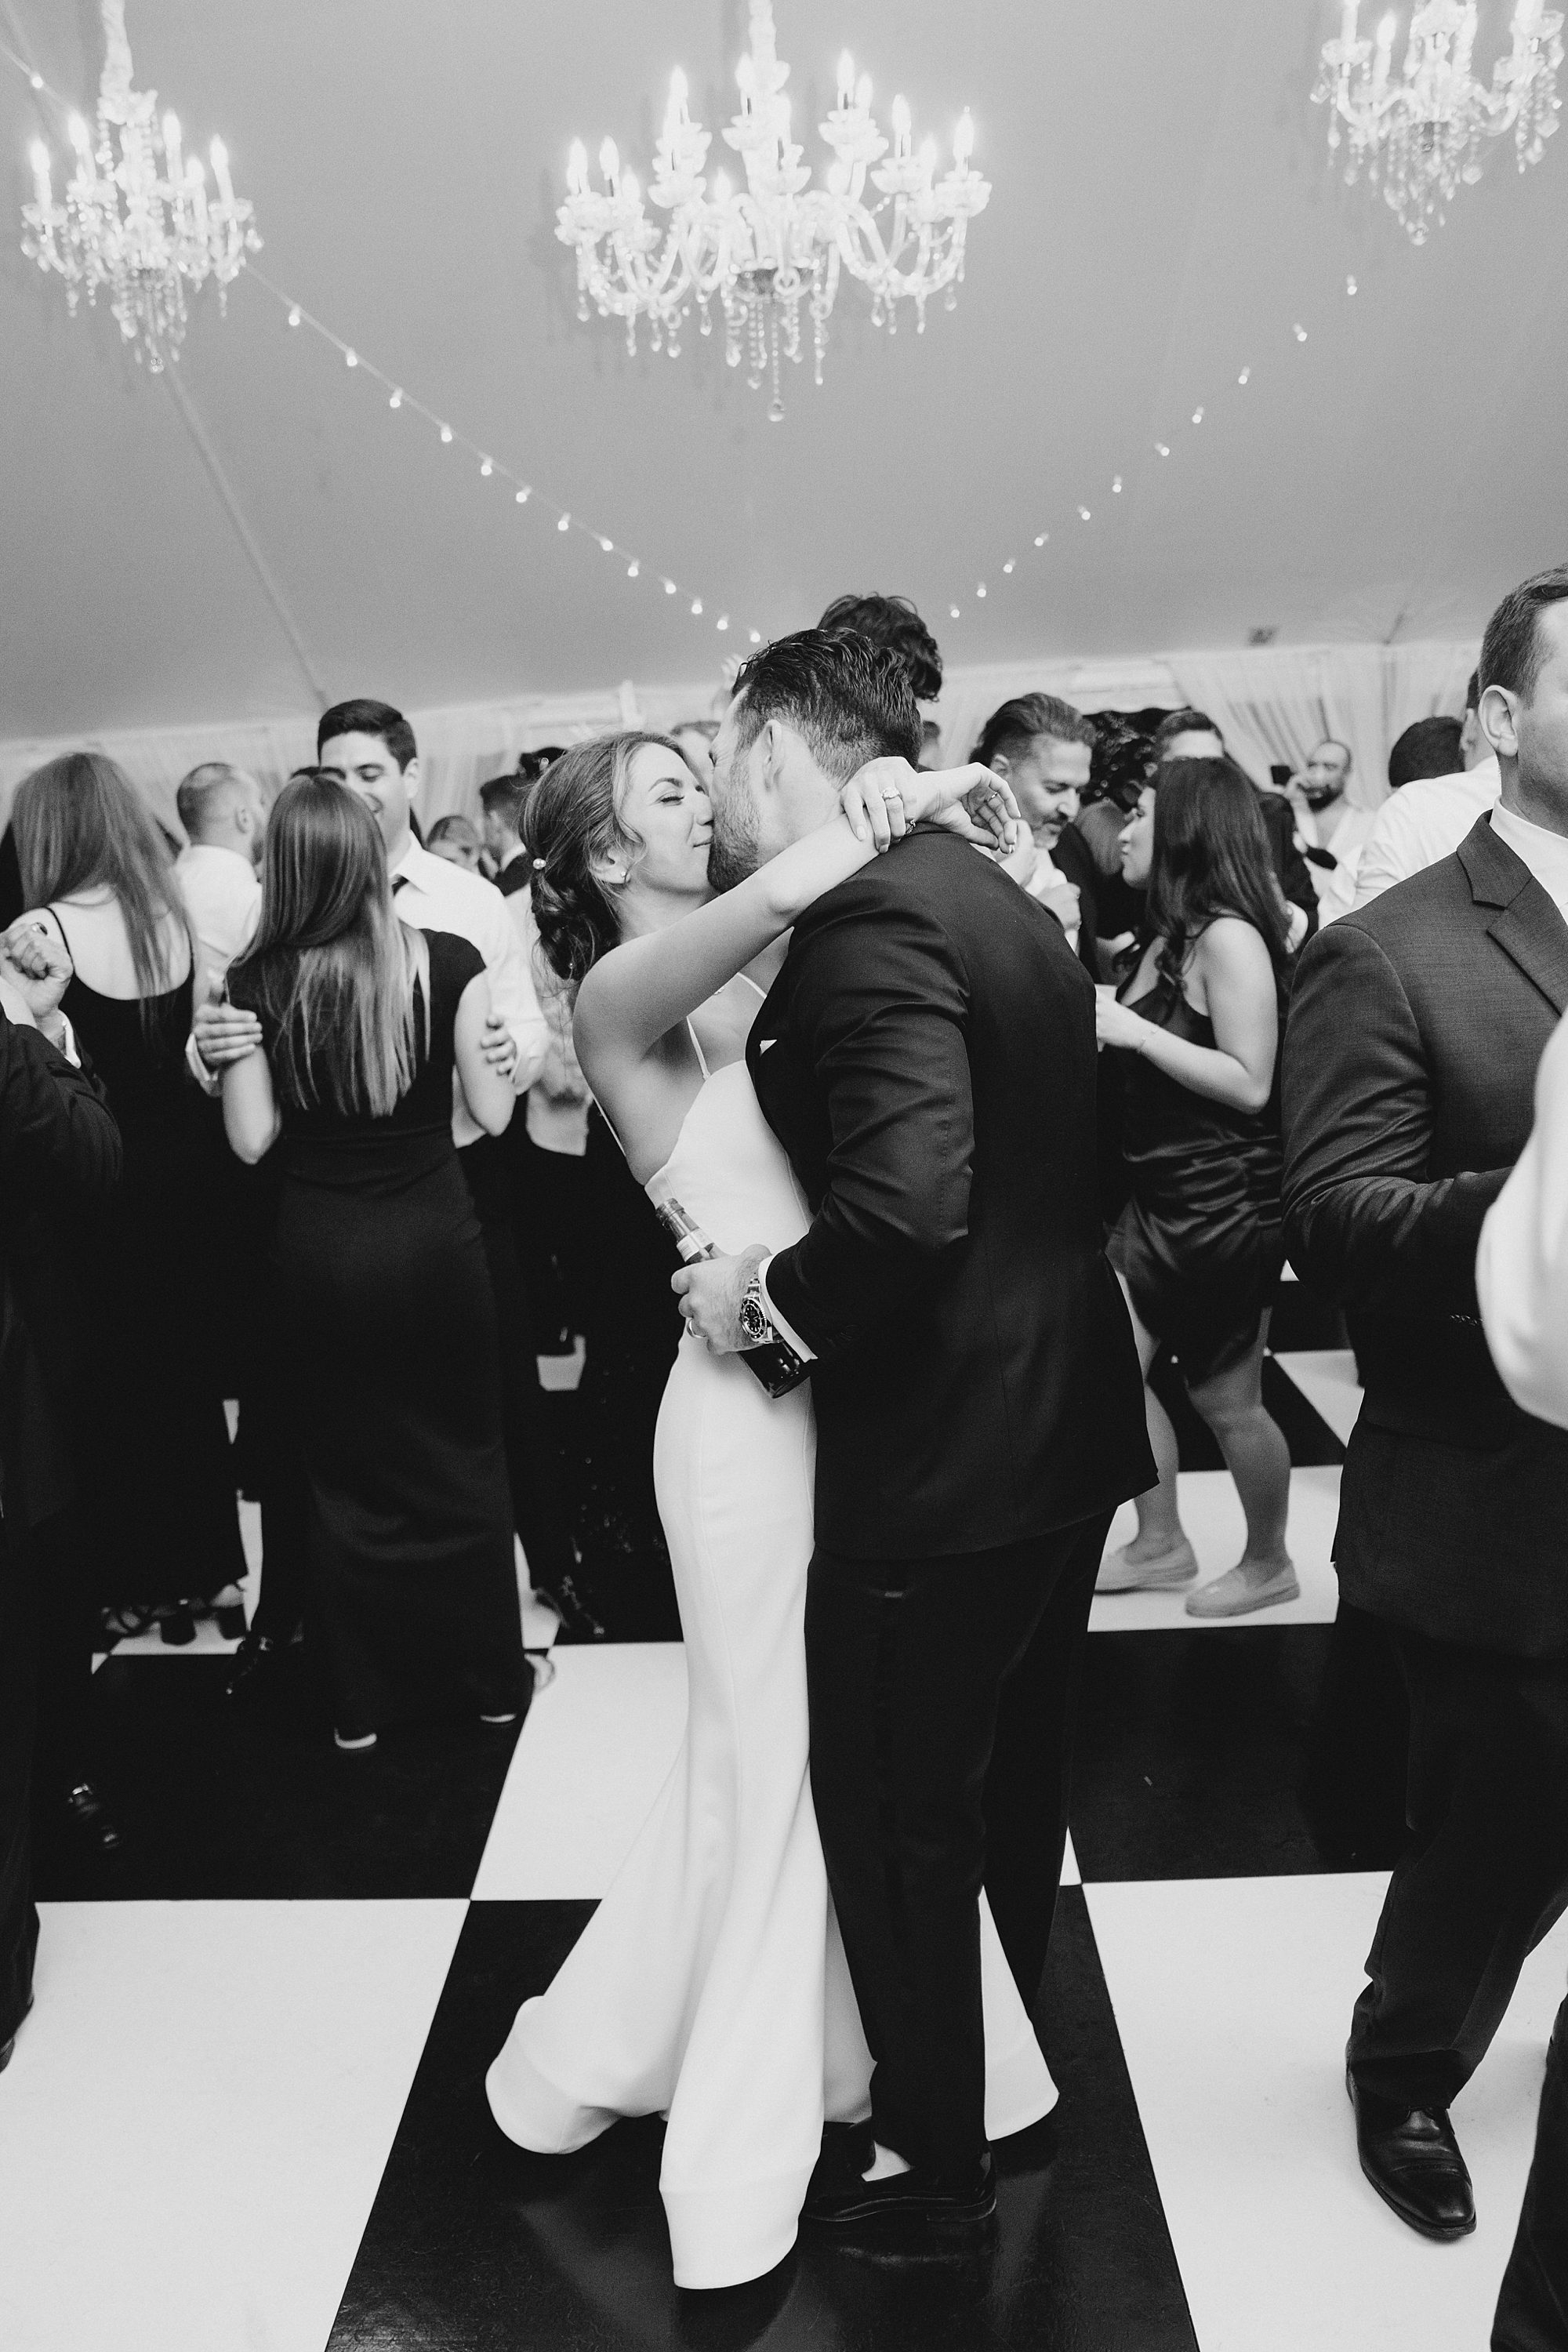 PA Wedding photographer captures couple dancing at wedding reception with guests